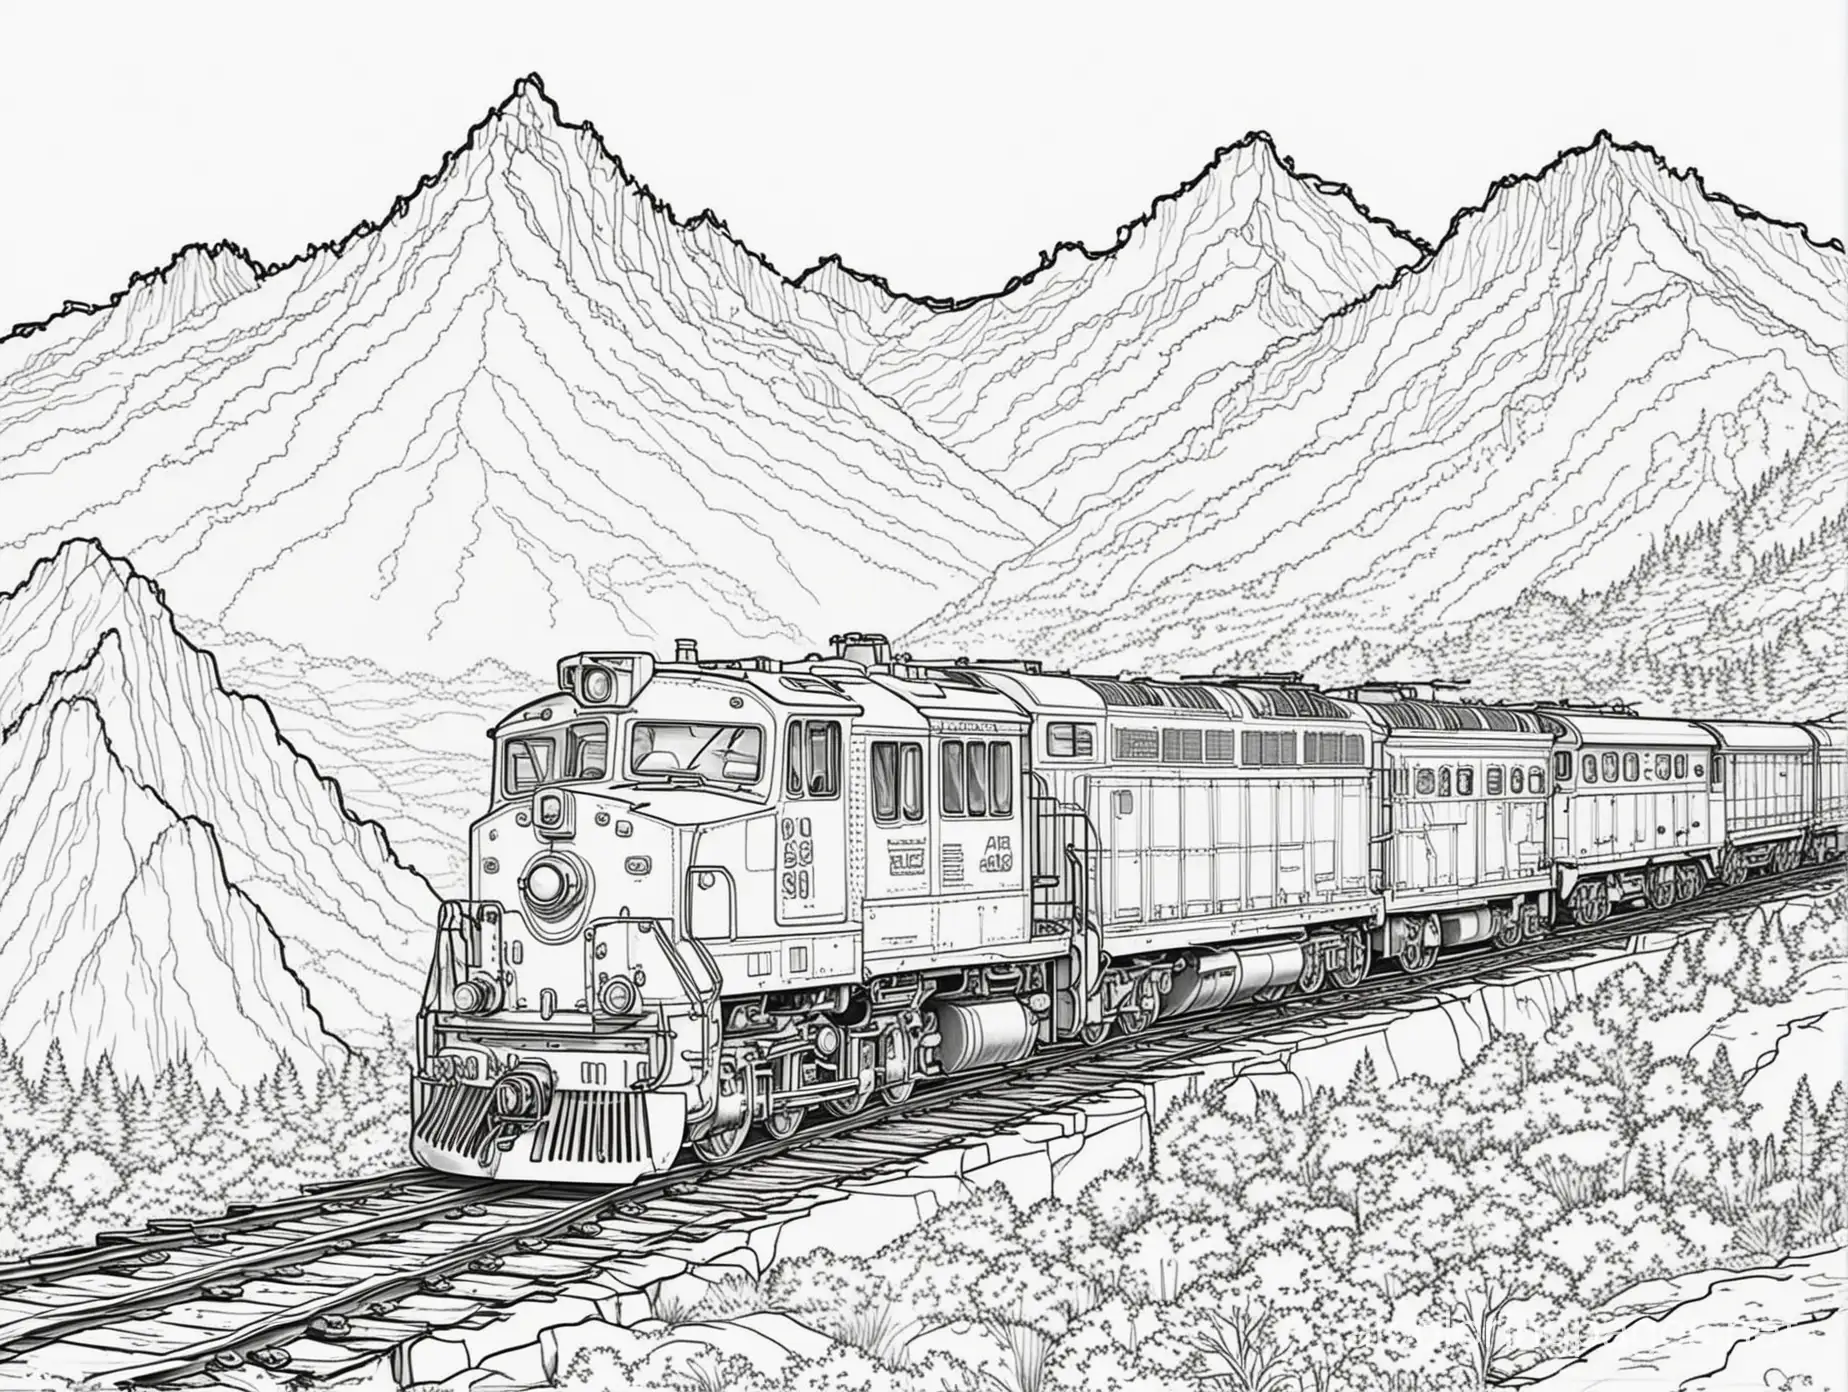 train mountain, Coloring Page, black and white, line art, white background, Simplicity, Ample White Space. The background of the coloring page is plain white to make it easy for young children to color within the lines. The outlines of all the subjects are easy to distinguish, making it simple for kids to color without too much difficulty